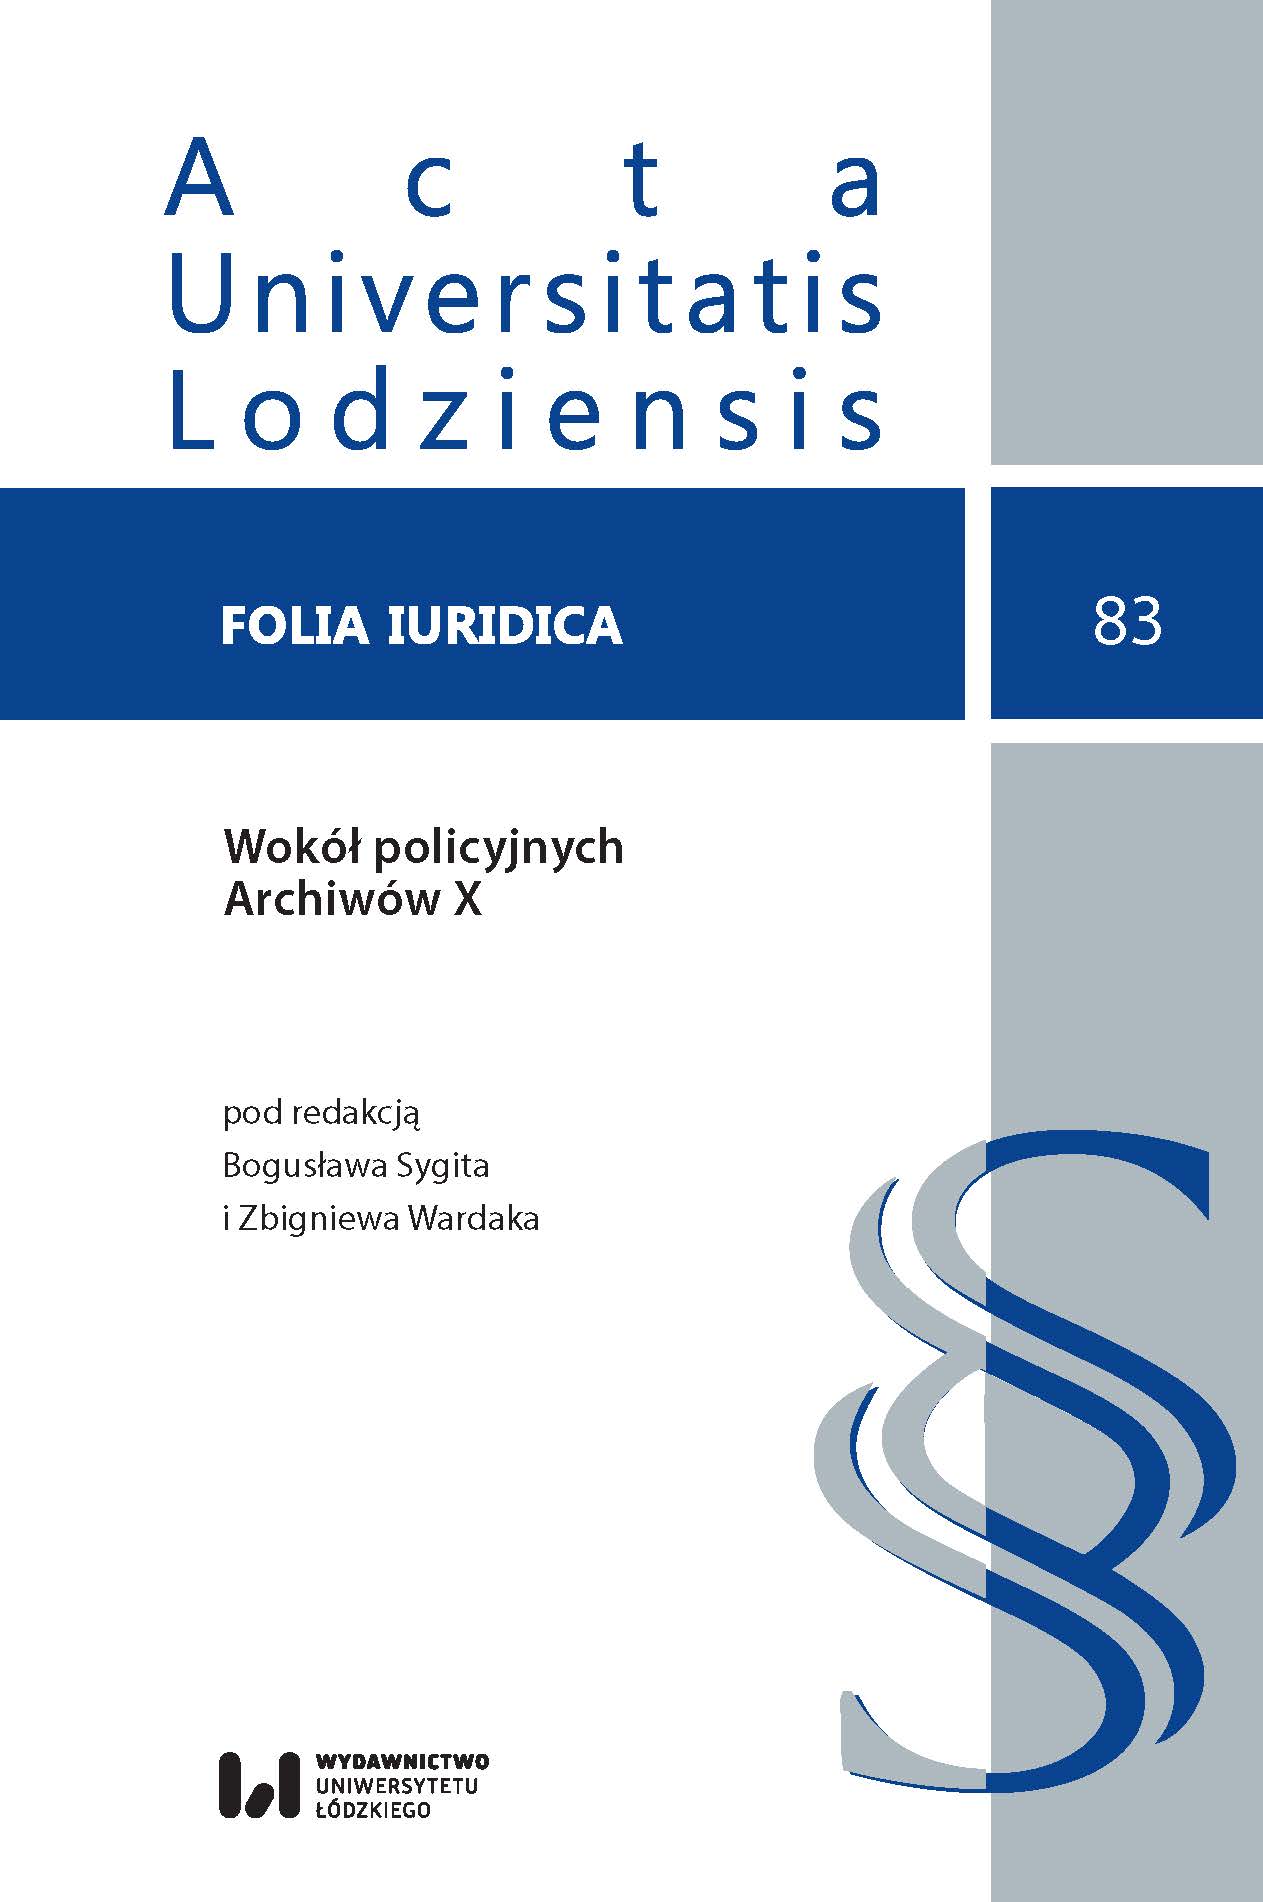 OBJECTION TO A DECISION OF THE COURT REFERENDARY IN THE SYSTEM OF LEGAL REMEDIES IN POLISH CRIMINAL PROCEEDINGS Cover Image